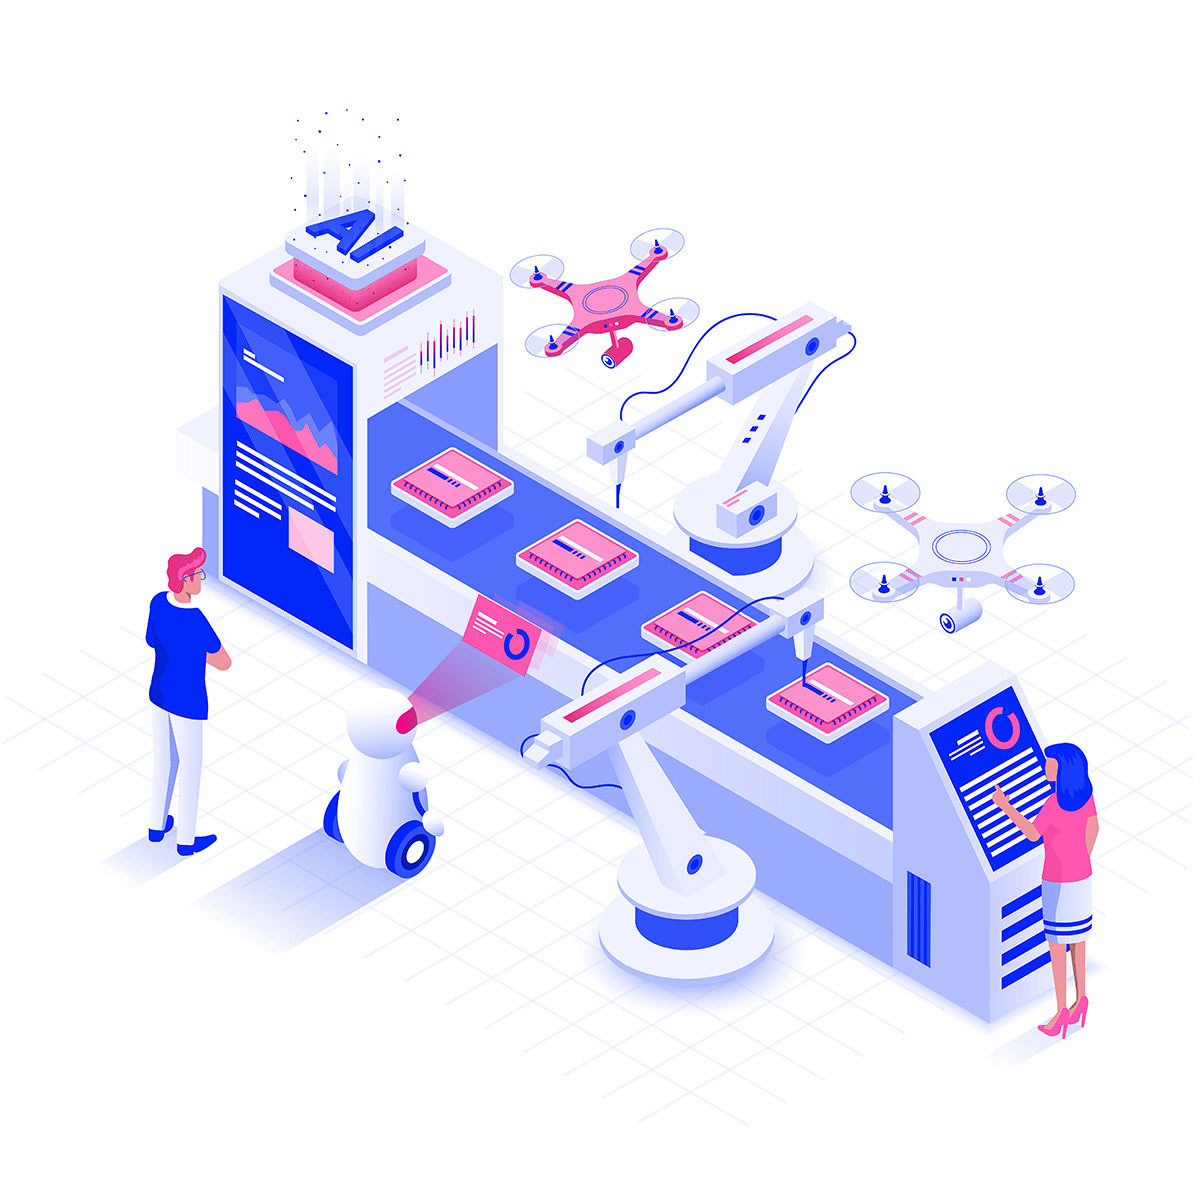 Isometric people characters illustartion business Technology vr artificial Smart creative